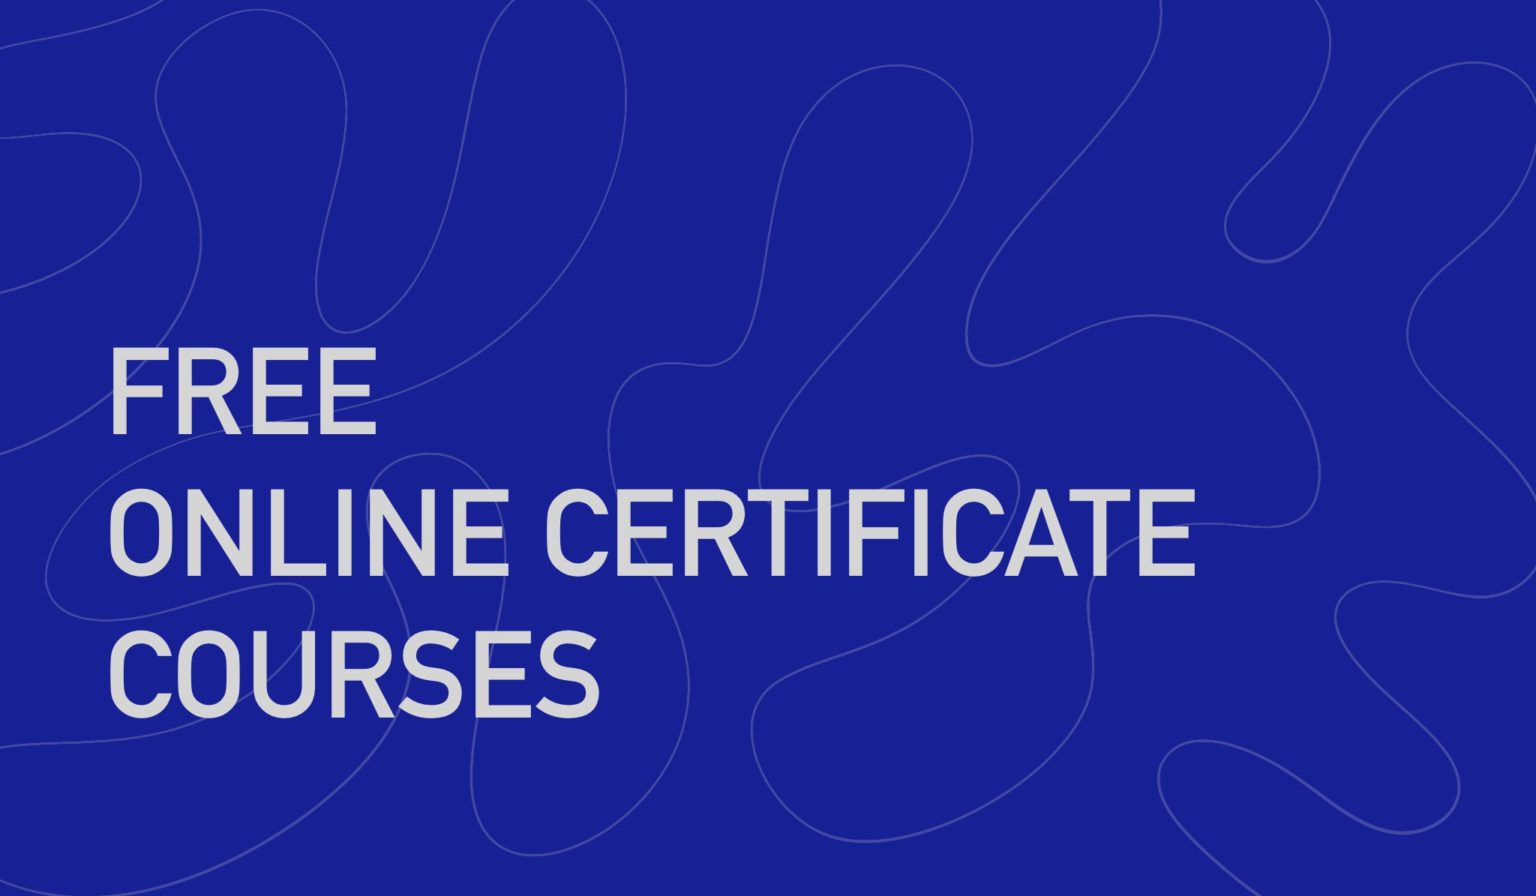 20 Best Free Online Certifications Courses 2020 UPDATED